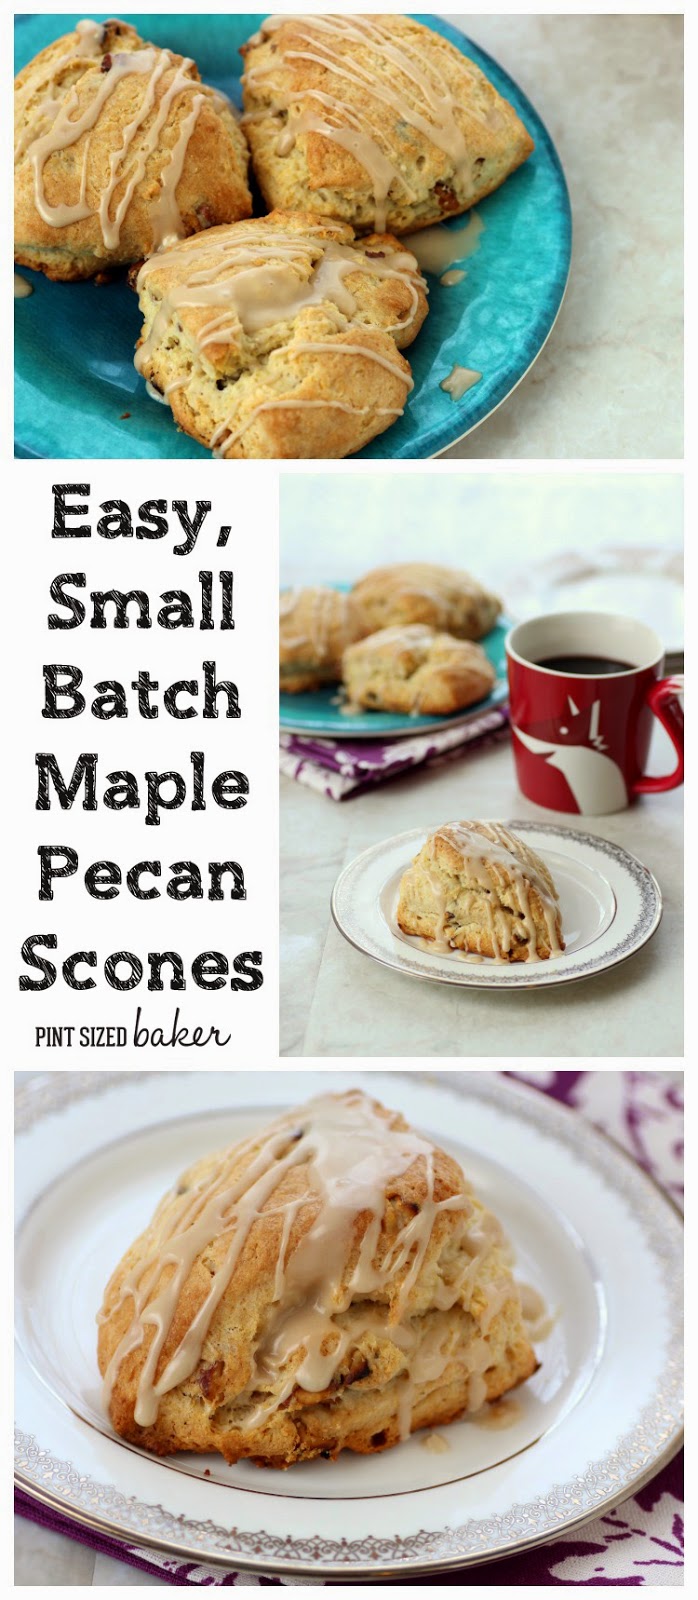 You're going to love baking up this Easy, Small Batch Maple Pecan Scone Recipe. It just makes 4 scones that you can freeze and save or serve to the family.